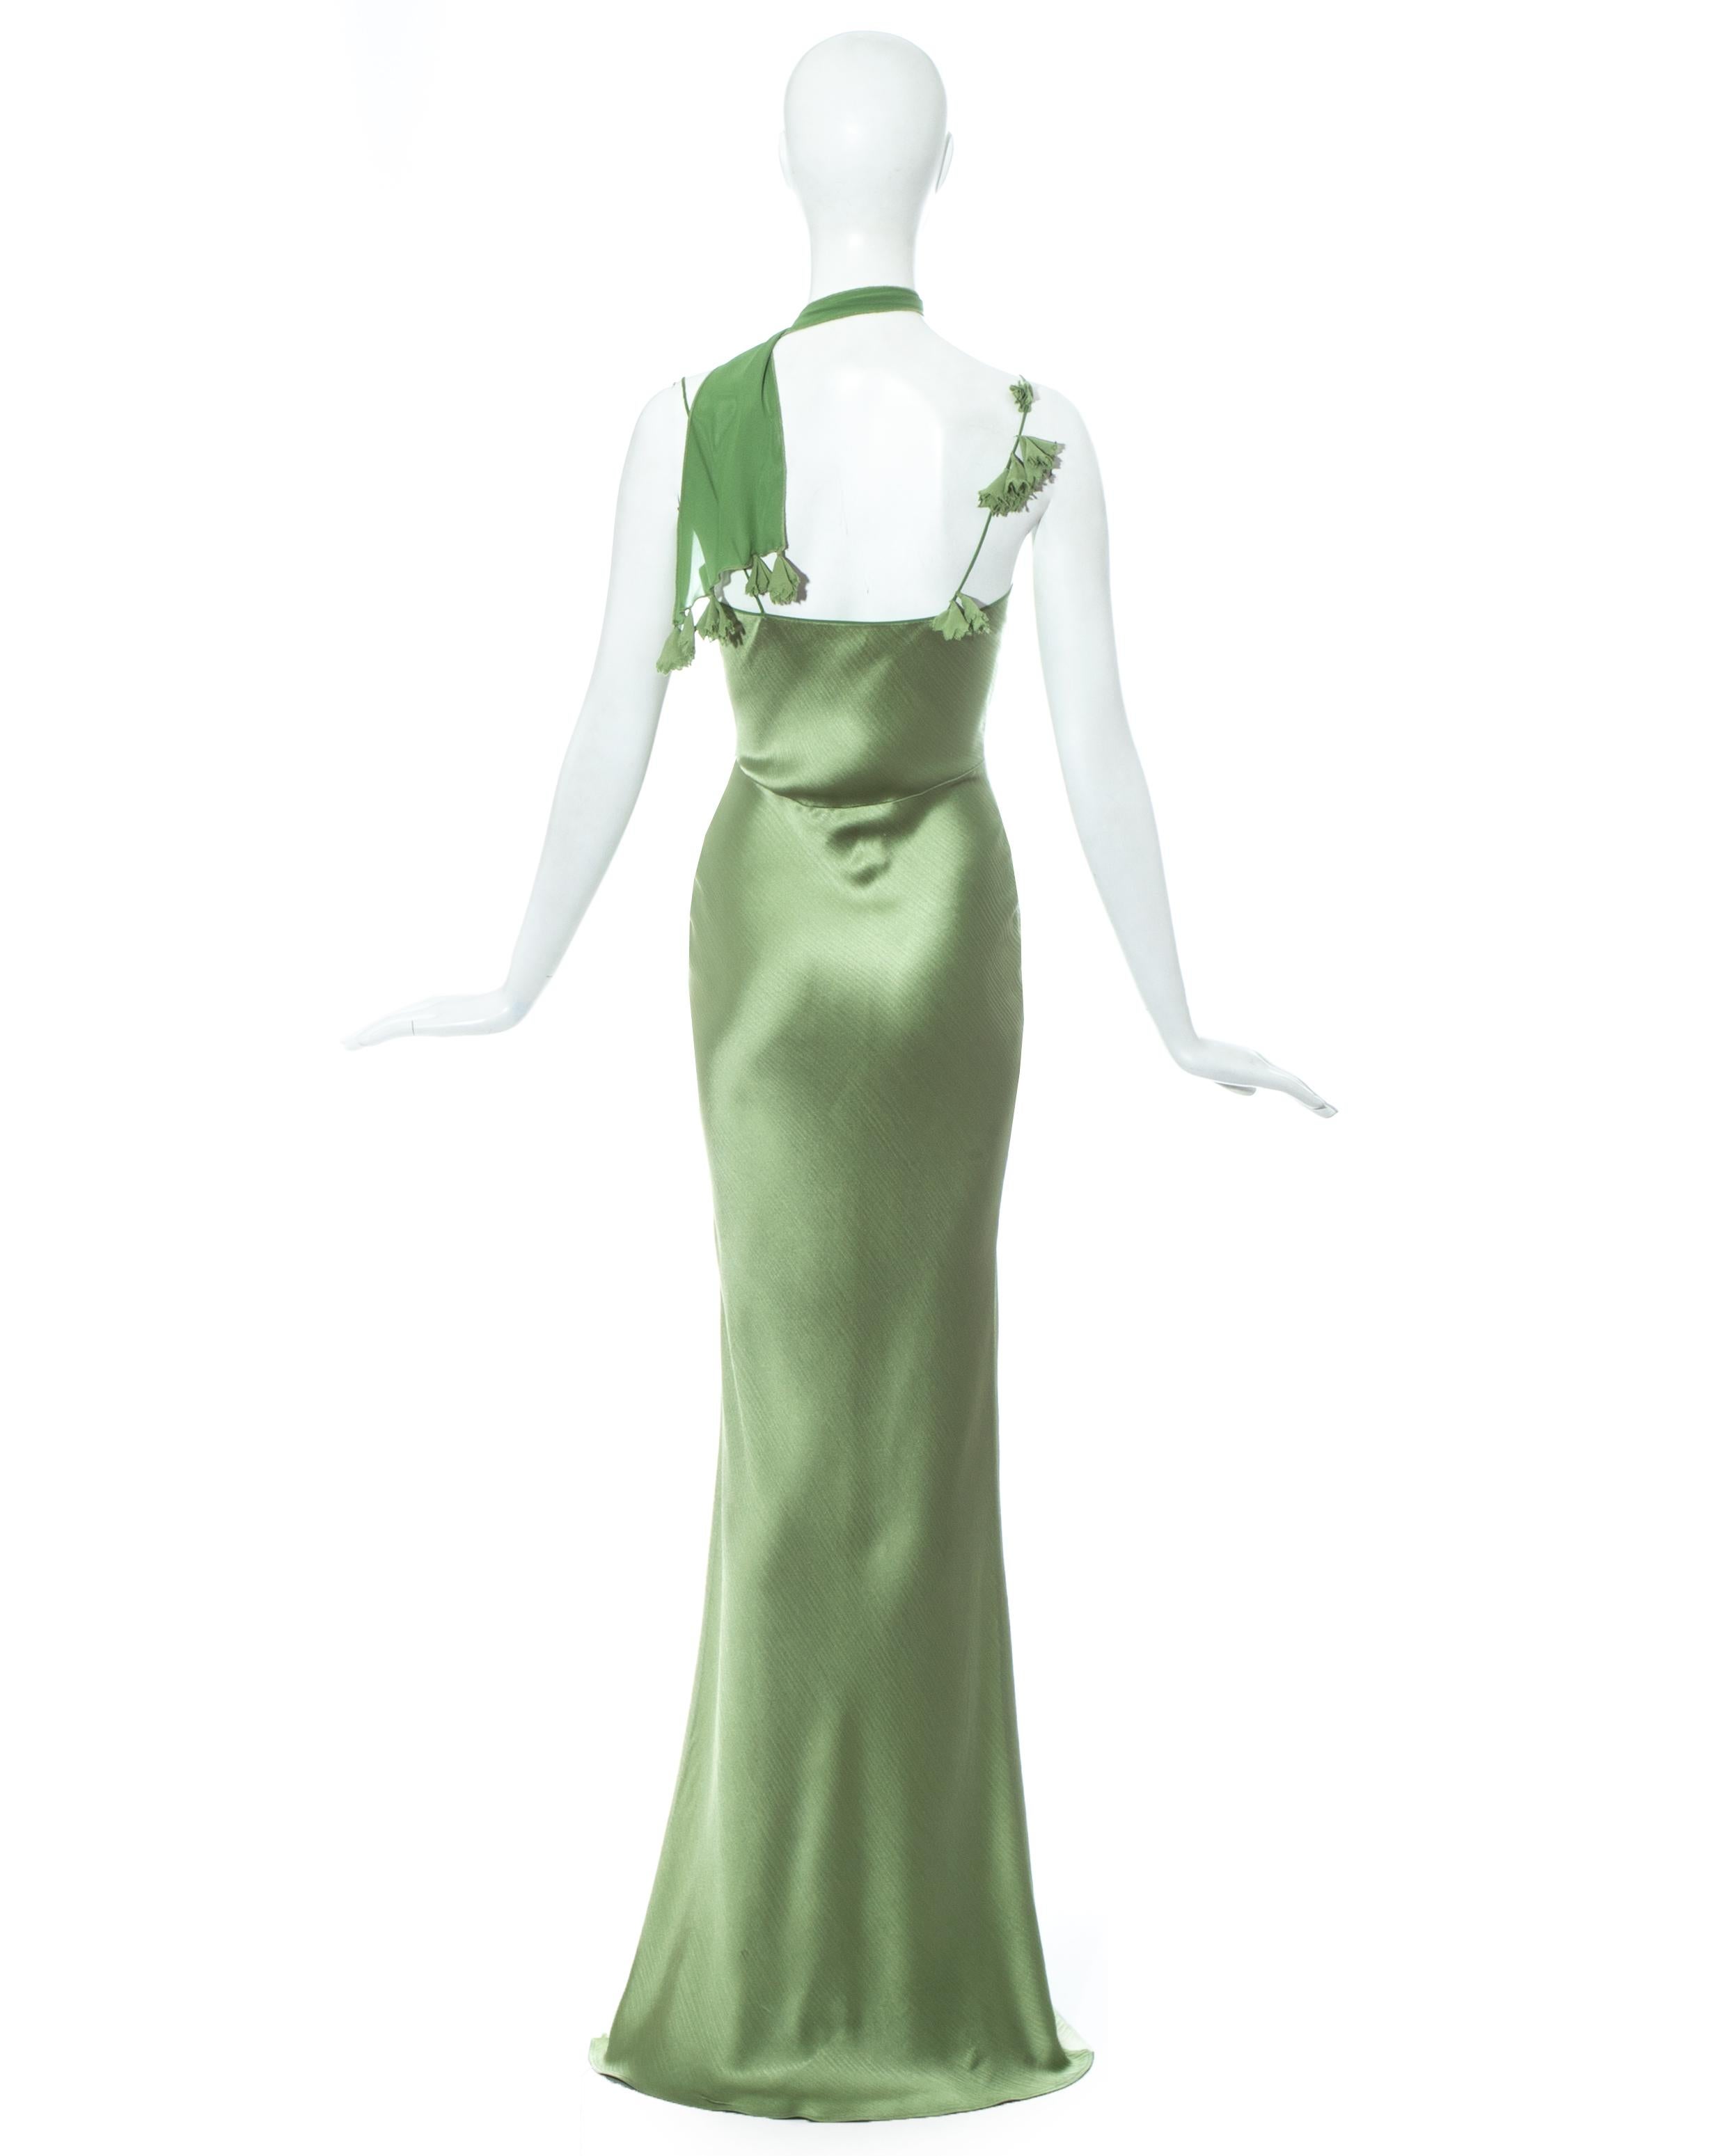 Gray John Galliano green acetate maxi dress with attached silk scarf, c. 1990s